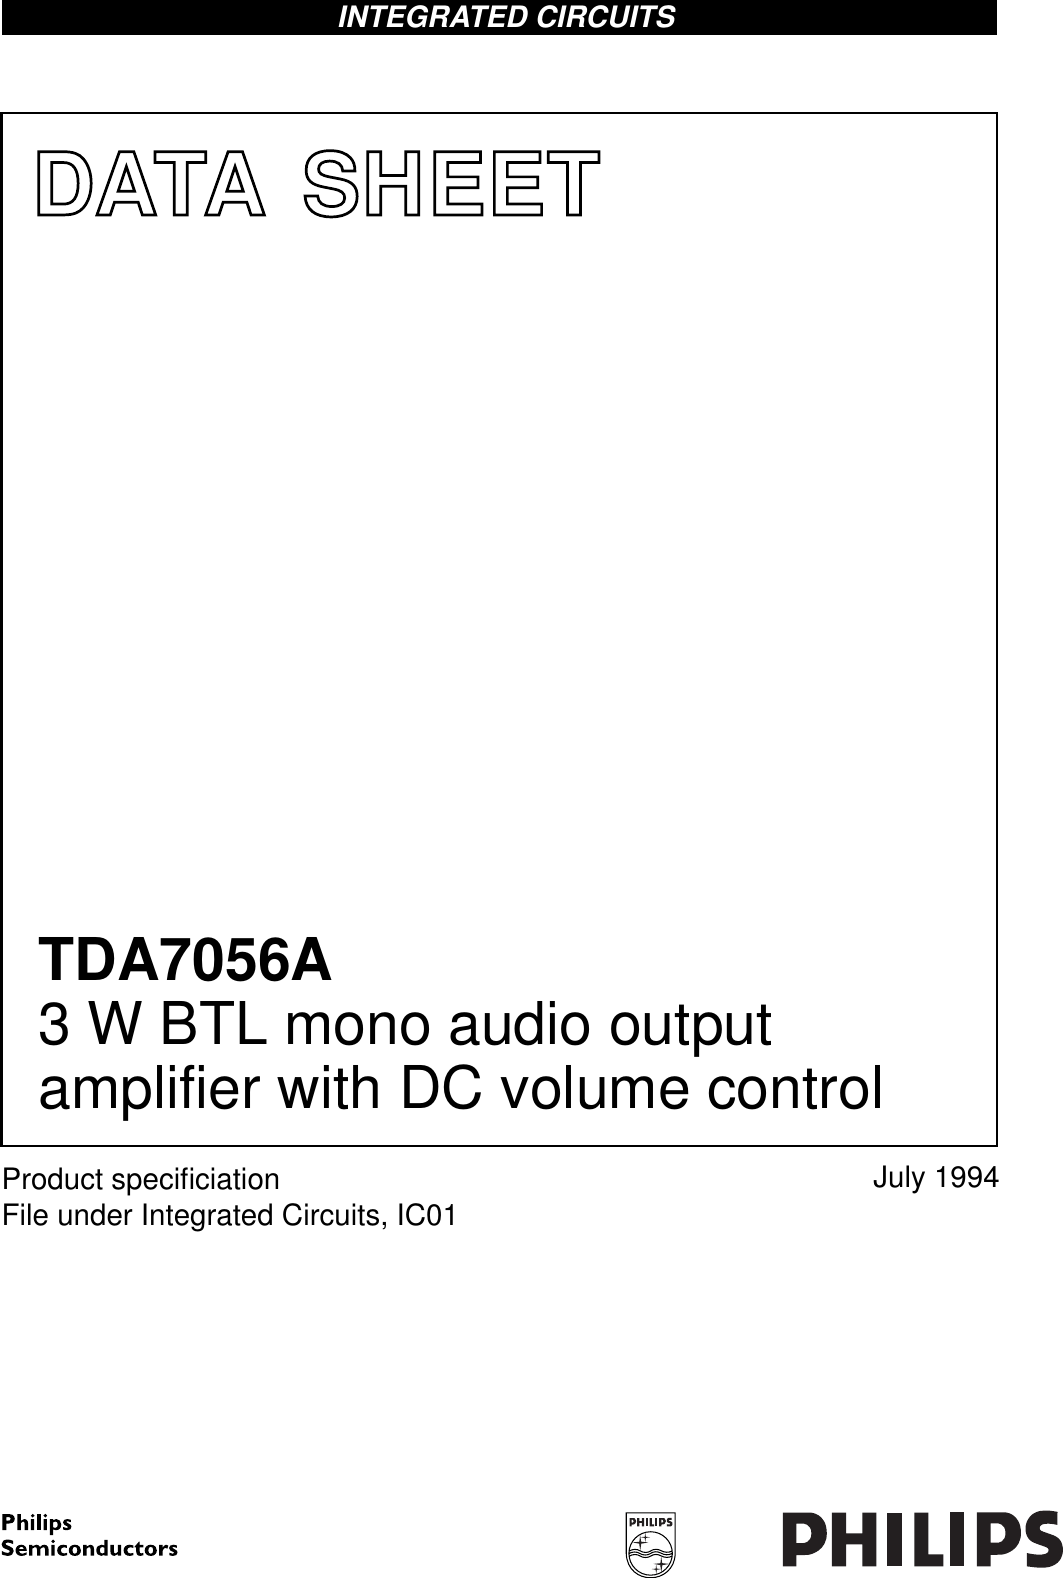 Page 1 of 9 - Philips Philips-Tda7056A-Users-Manual- 3 W BTL Mono Audio Output Amplifier With DC Volume Control  Philips-tda7056a-users-manual